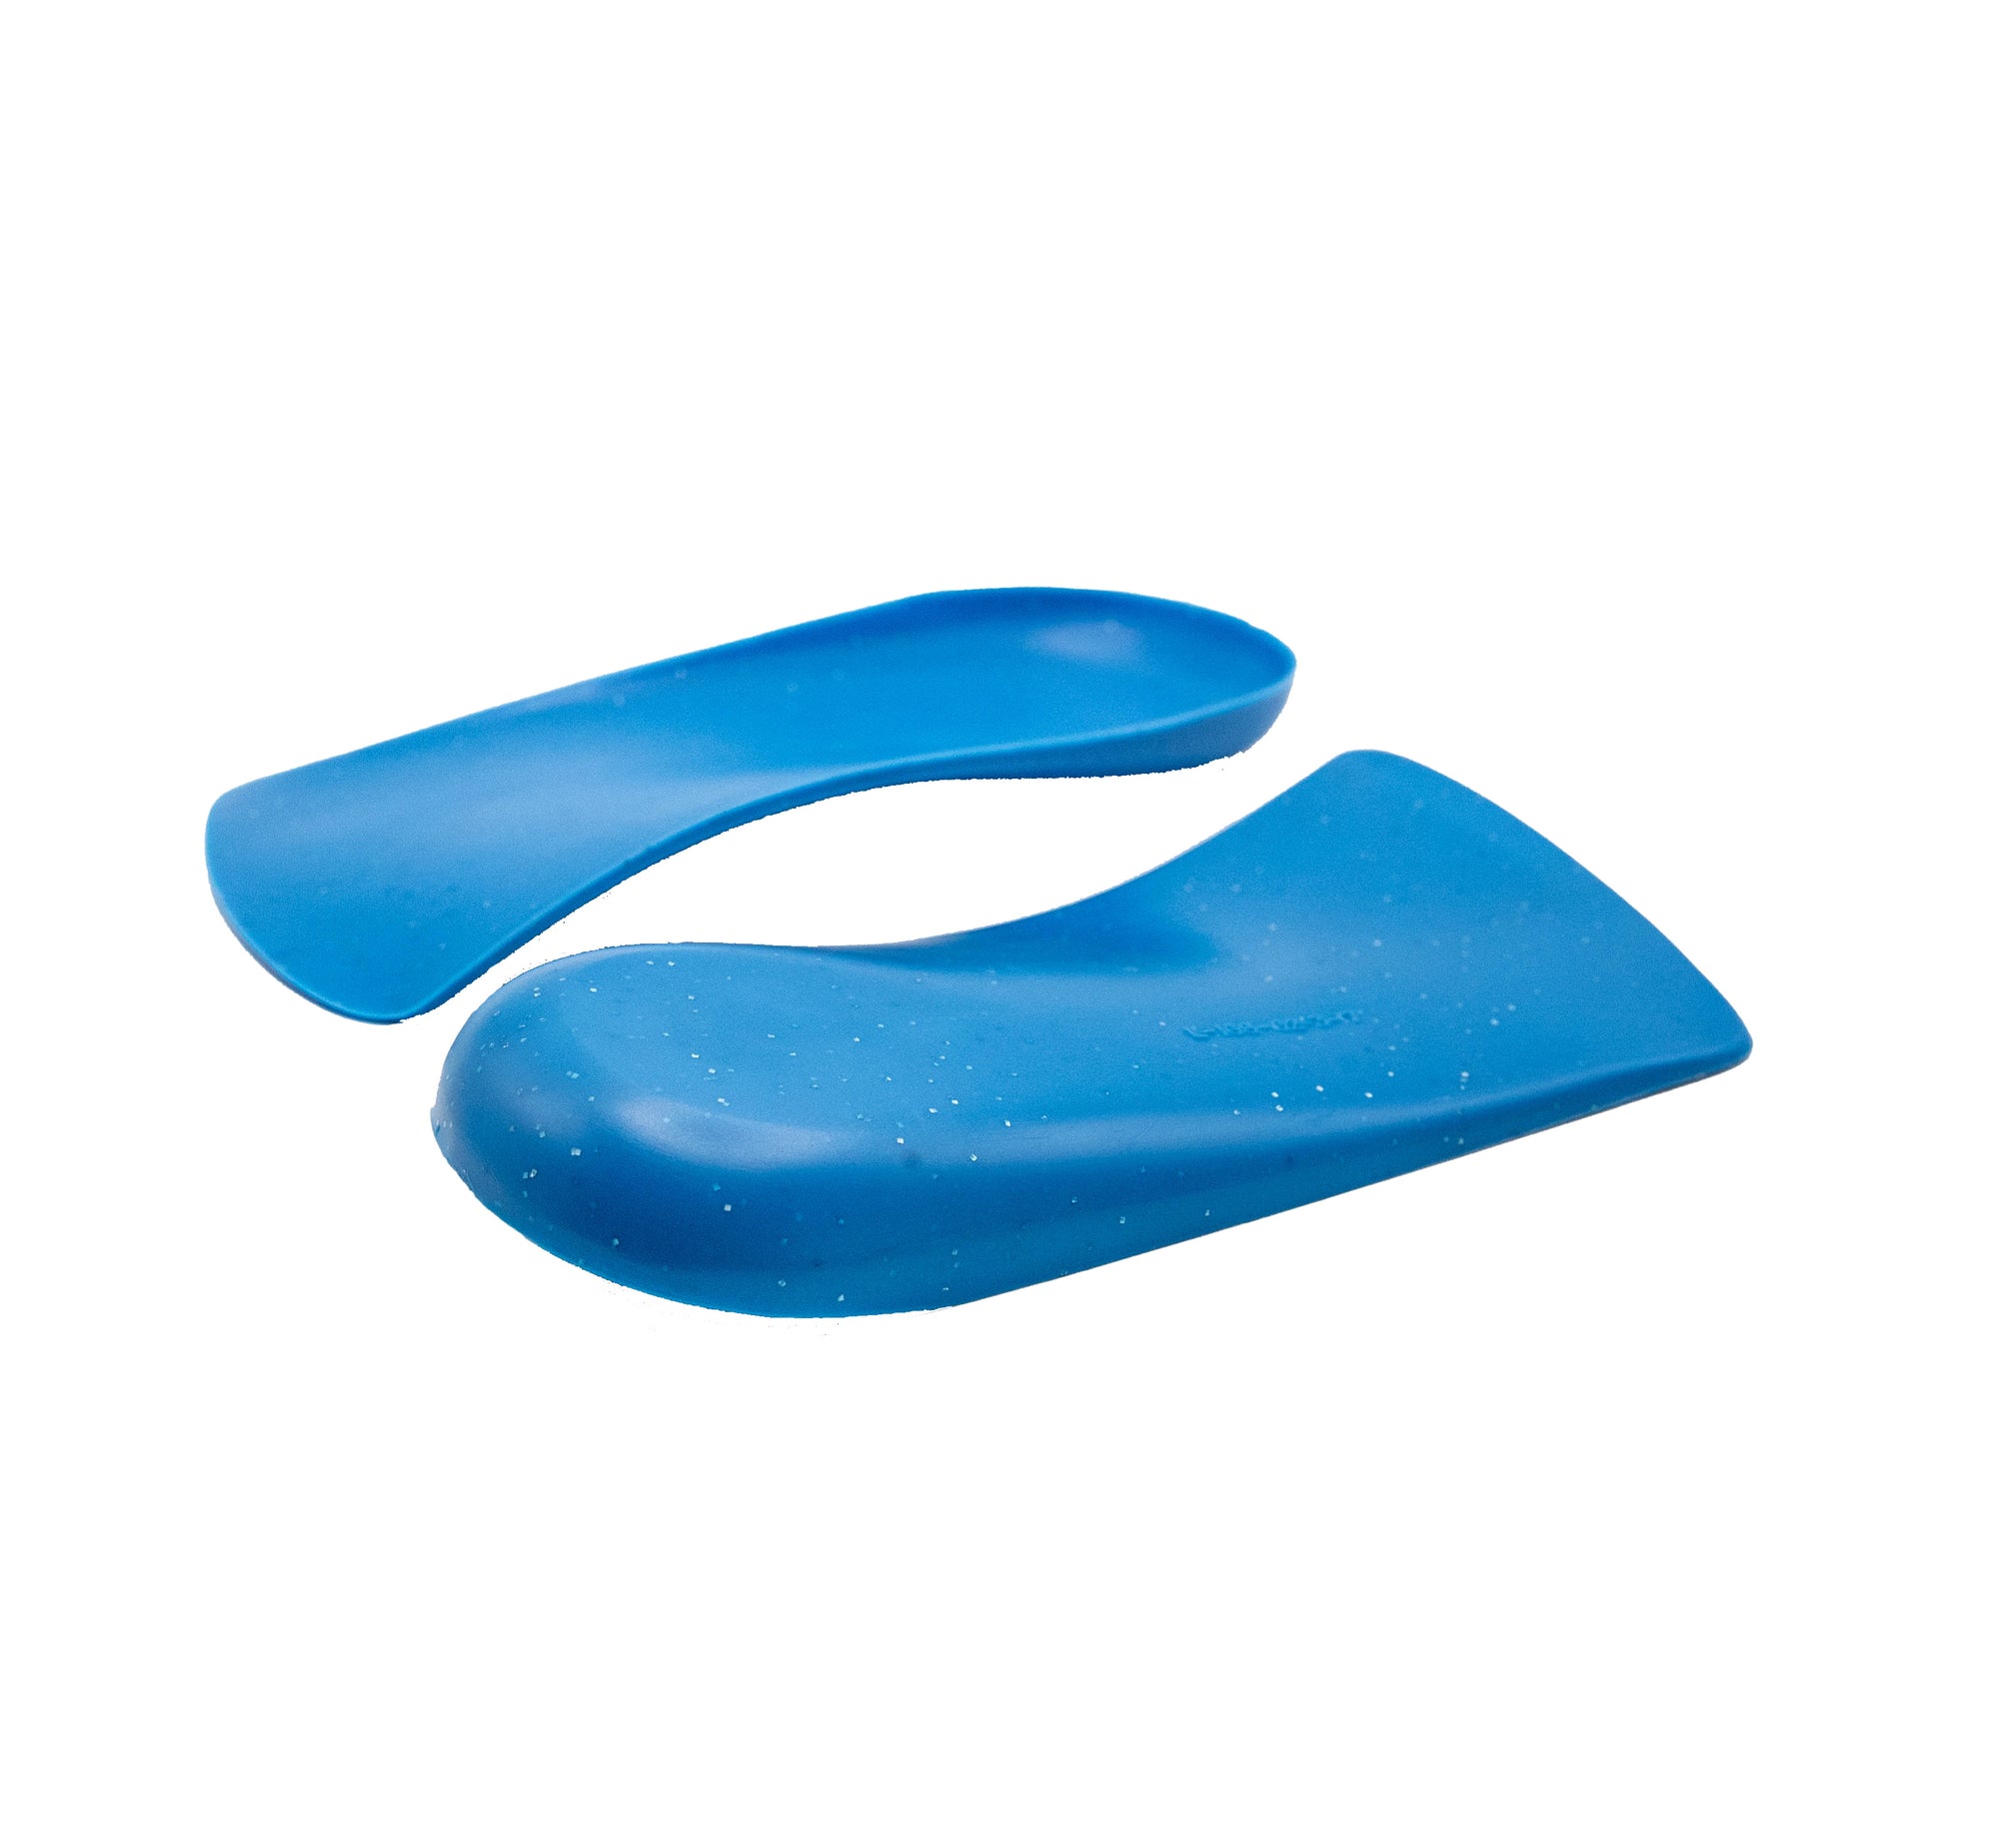 Cloud Comfort Orthotic | Insoles Designed for All-Day Comfort